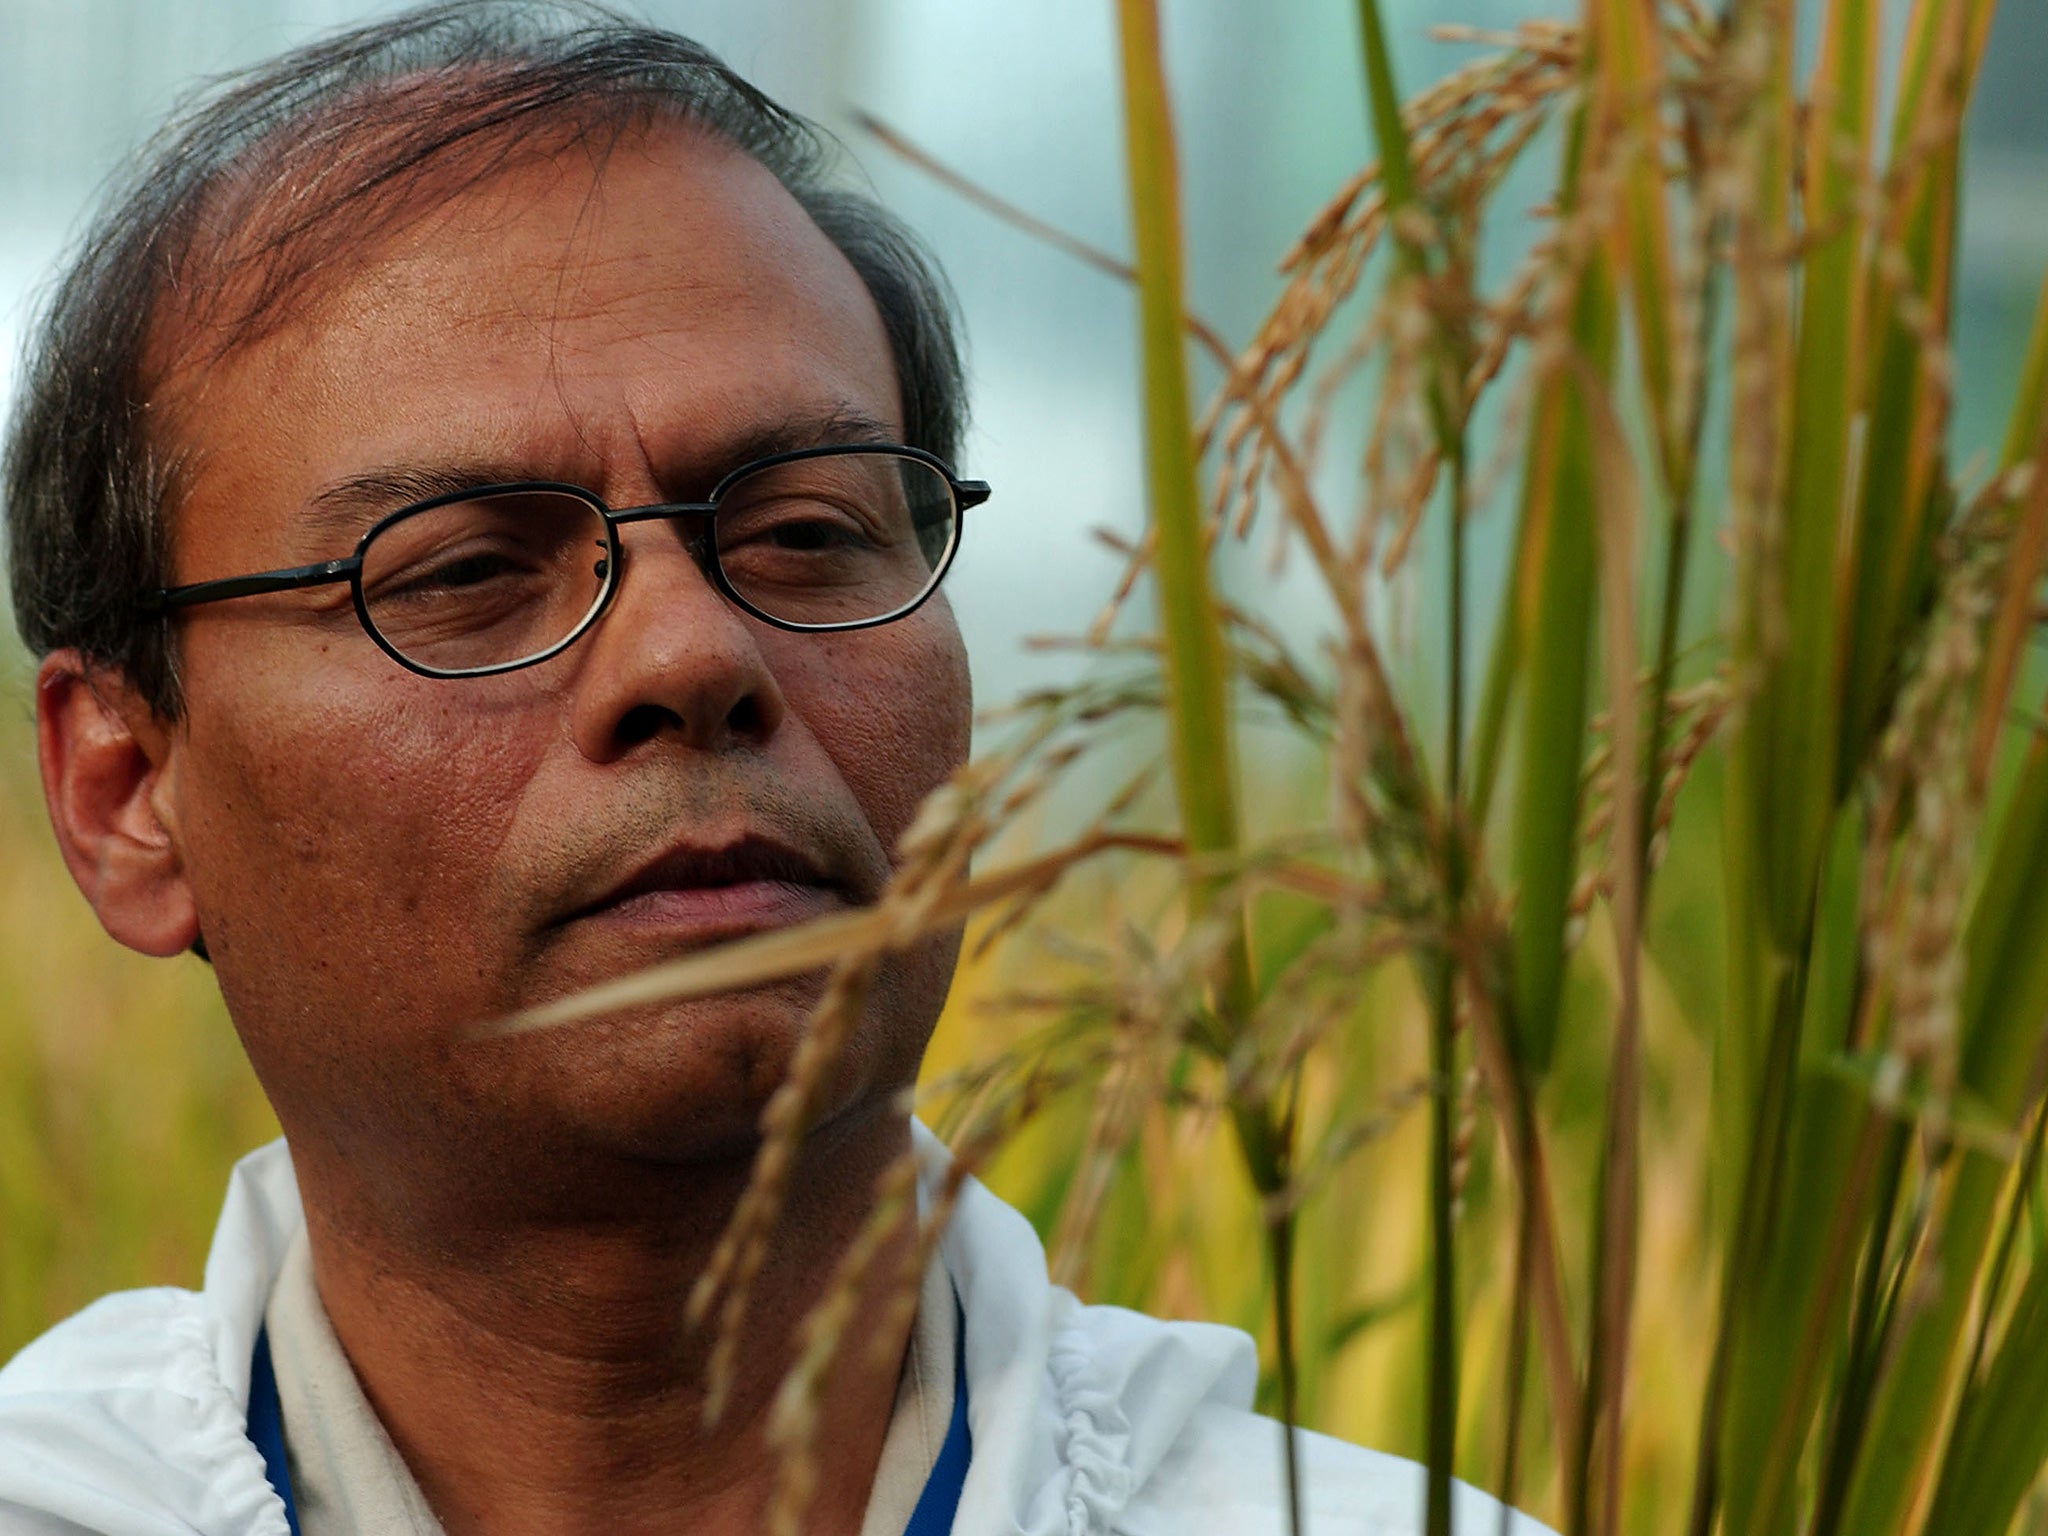 Biotechnologist Dr. Swapan Datta inspects a 'Golden Rice' plant at the International Rice Research Institute